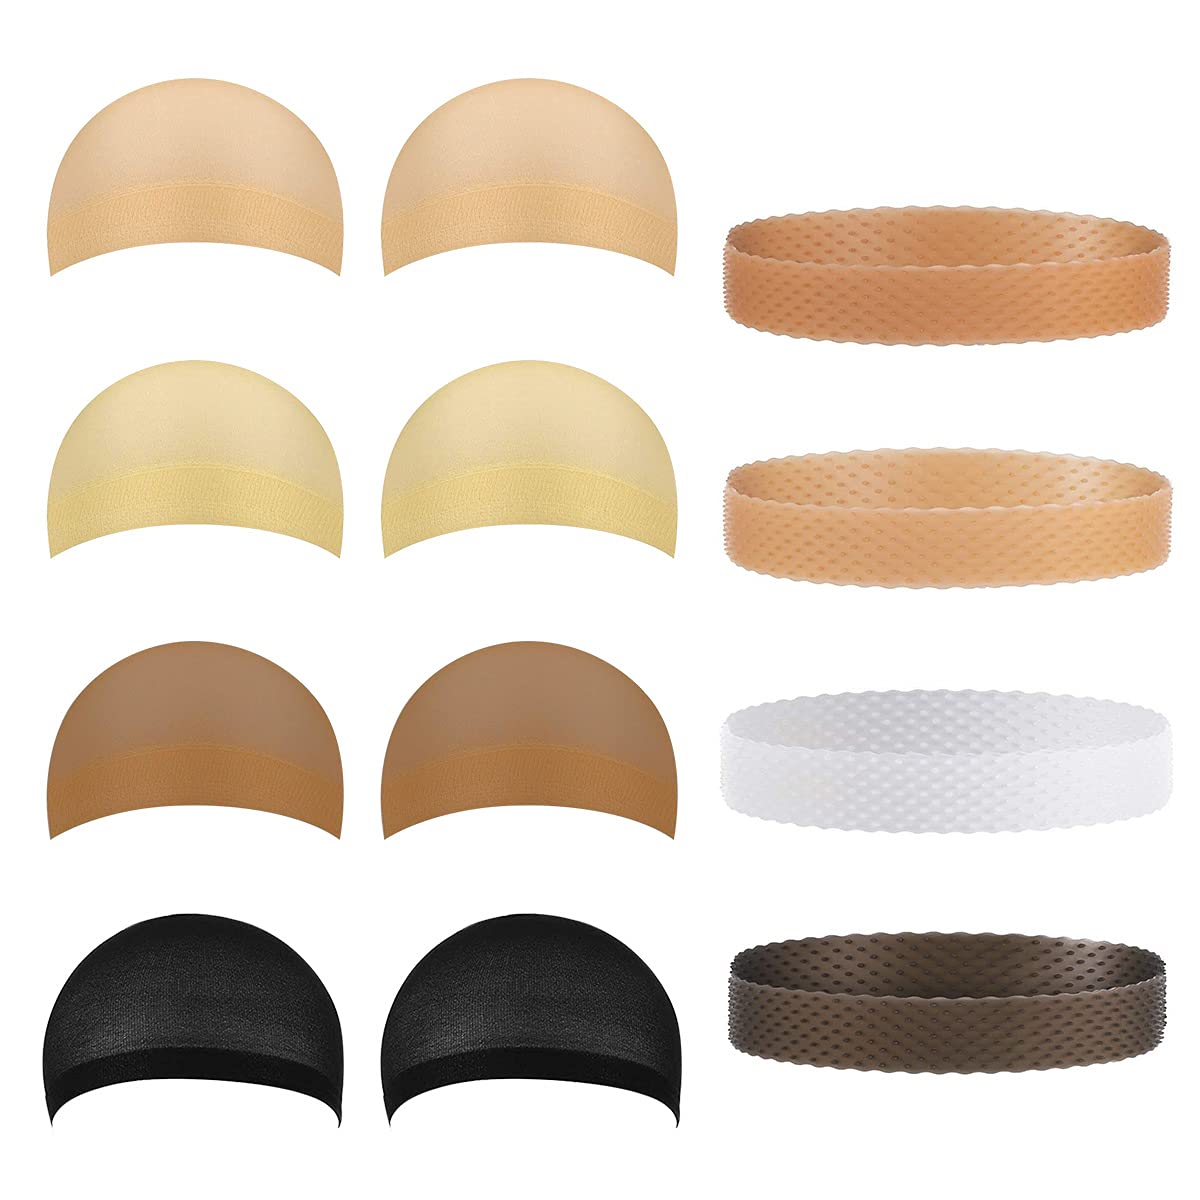 3pcs Silicone Wig Grip Band and 4pcs Wig Stocking Caps Seamless Adjust Wig Headband for Women Sweat-proof Wig Fix Accessories Wig Bands for Keeping